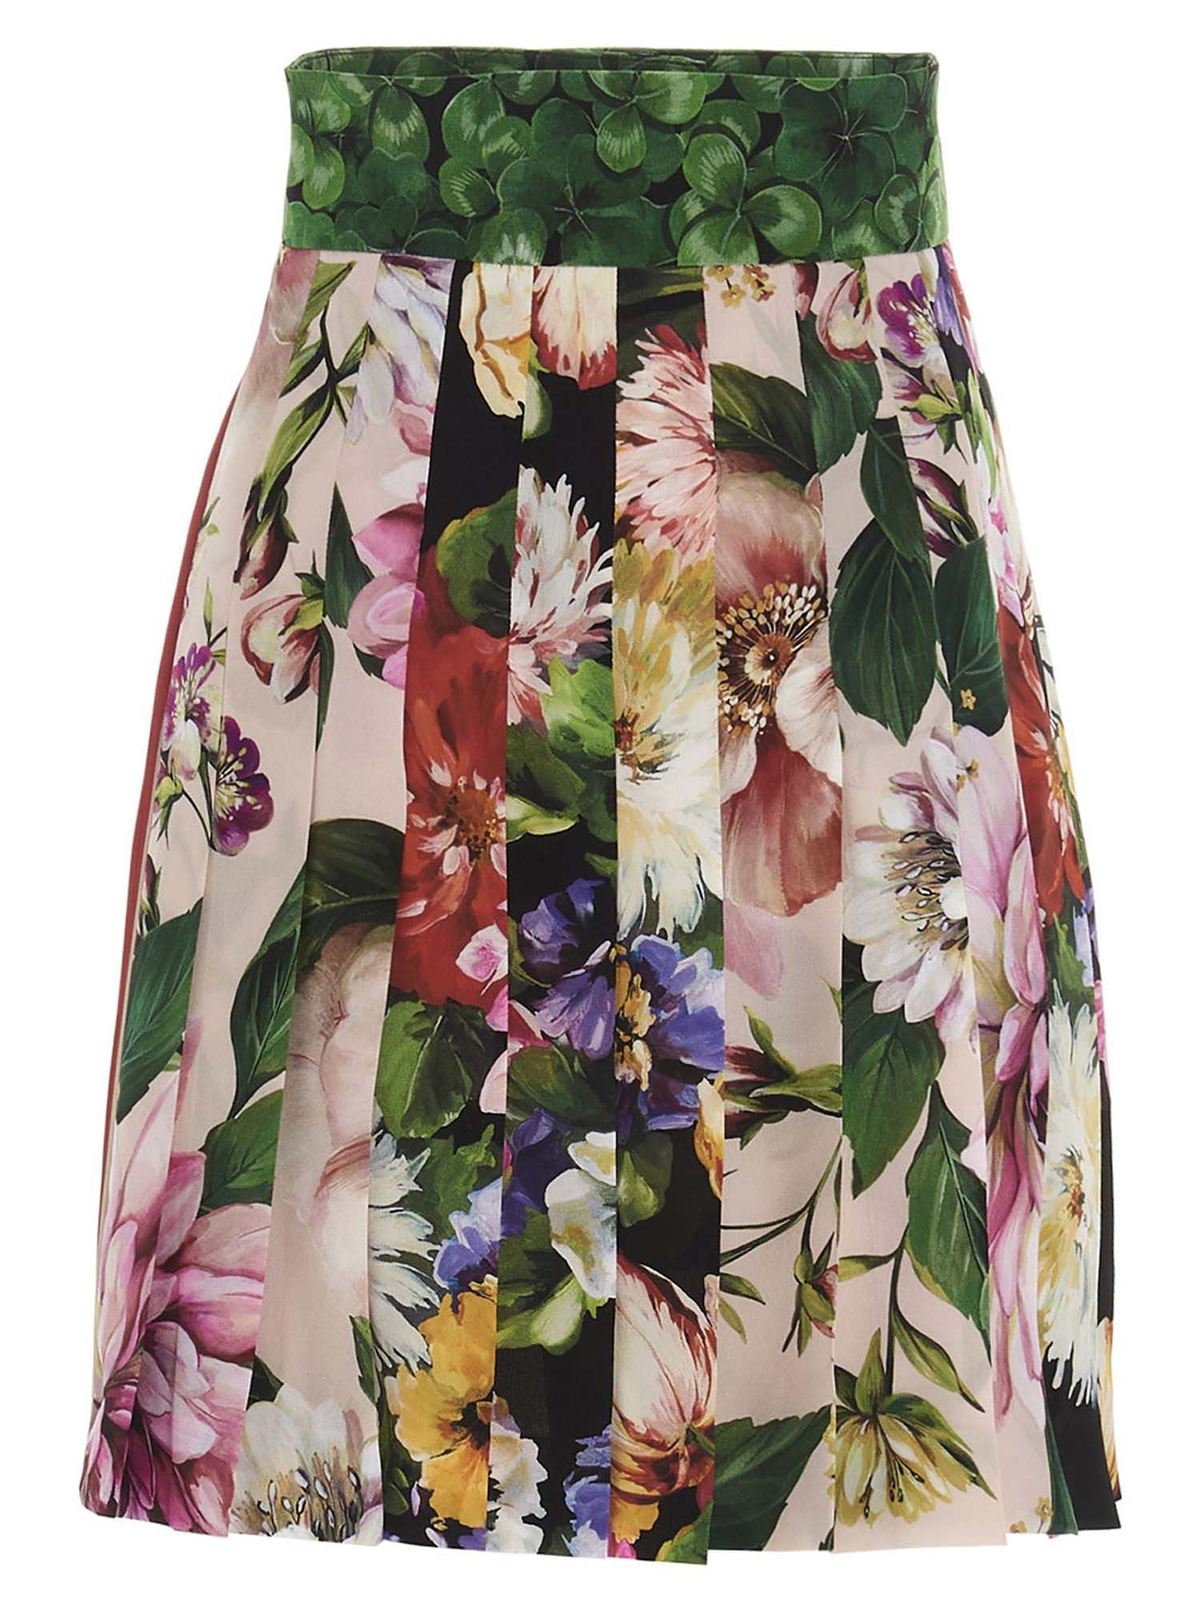 DOLCE & GABBANA PATCHWORK PLEATED SKIRT IN MULTICOLOR